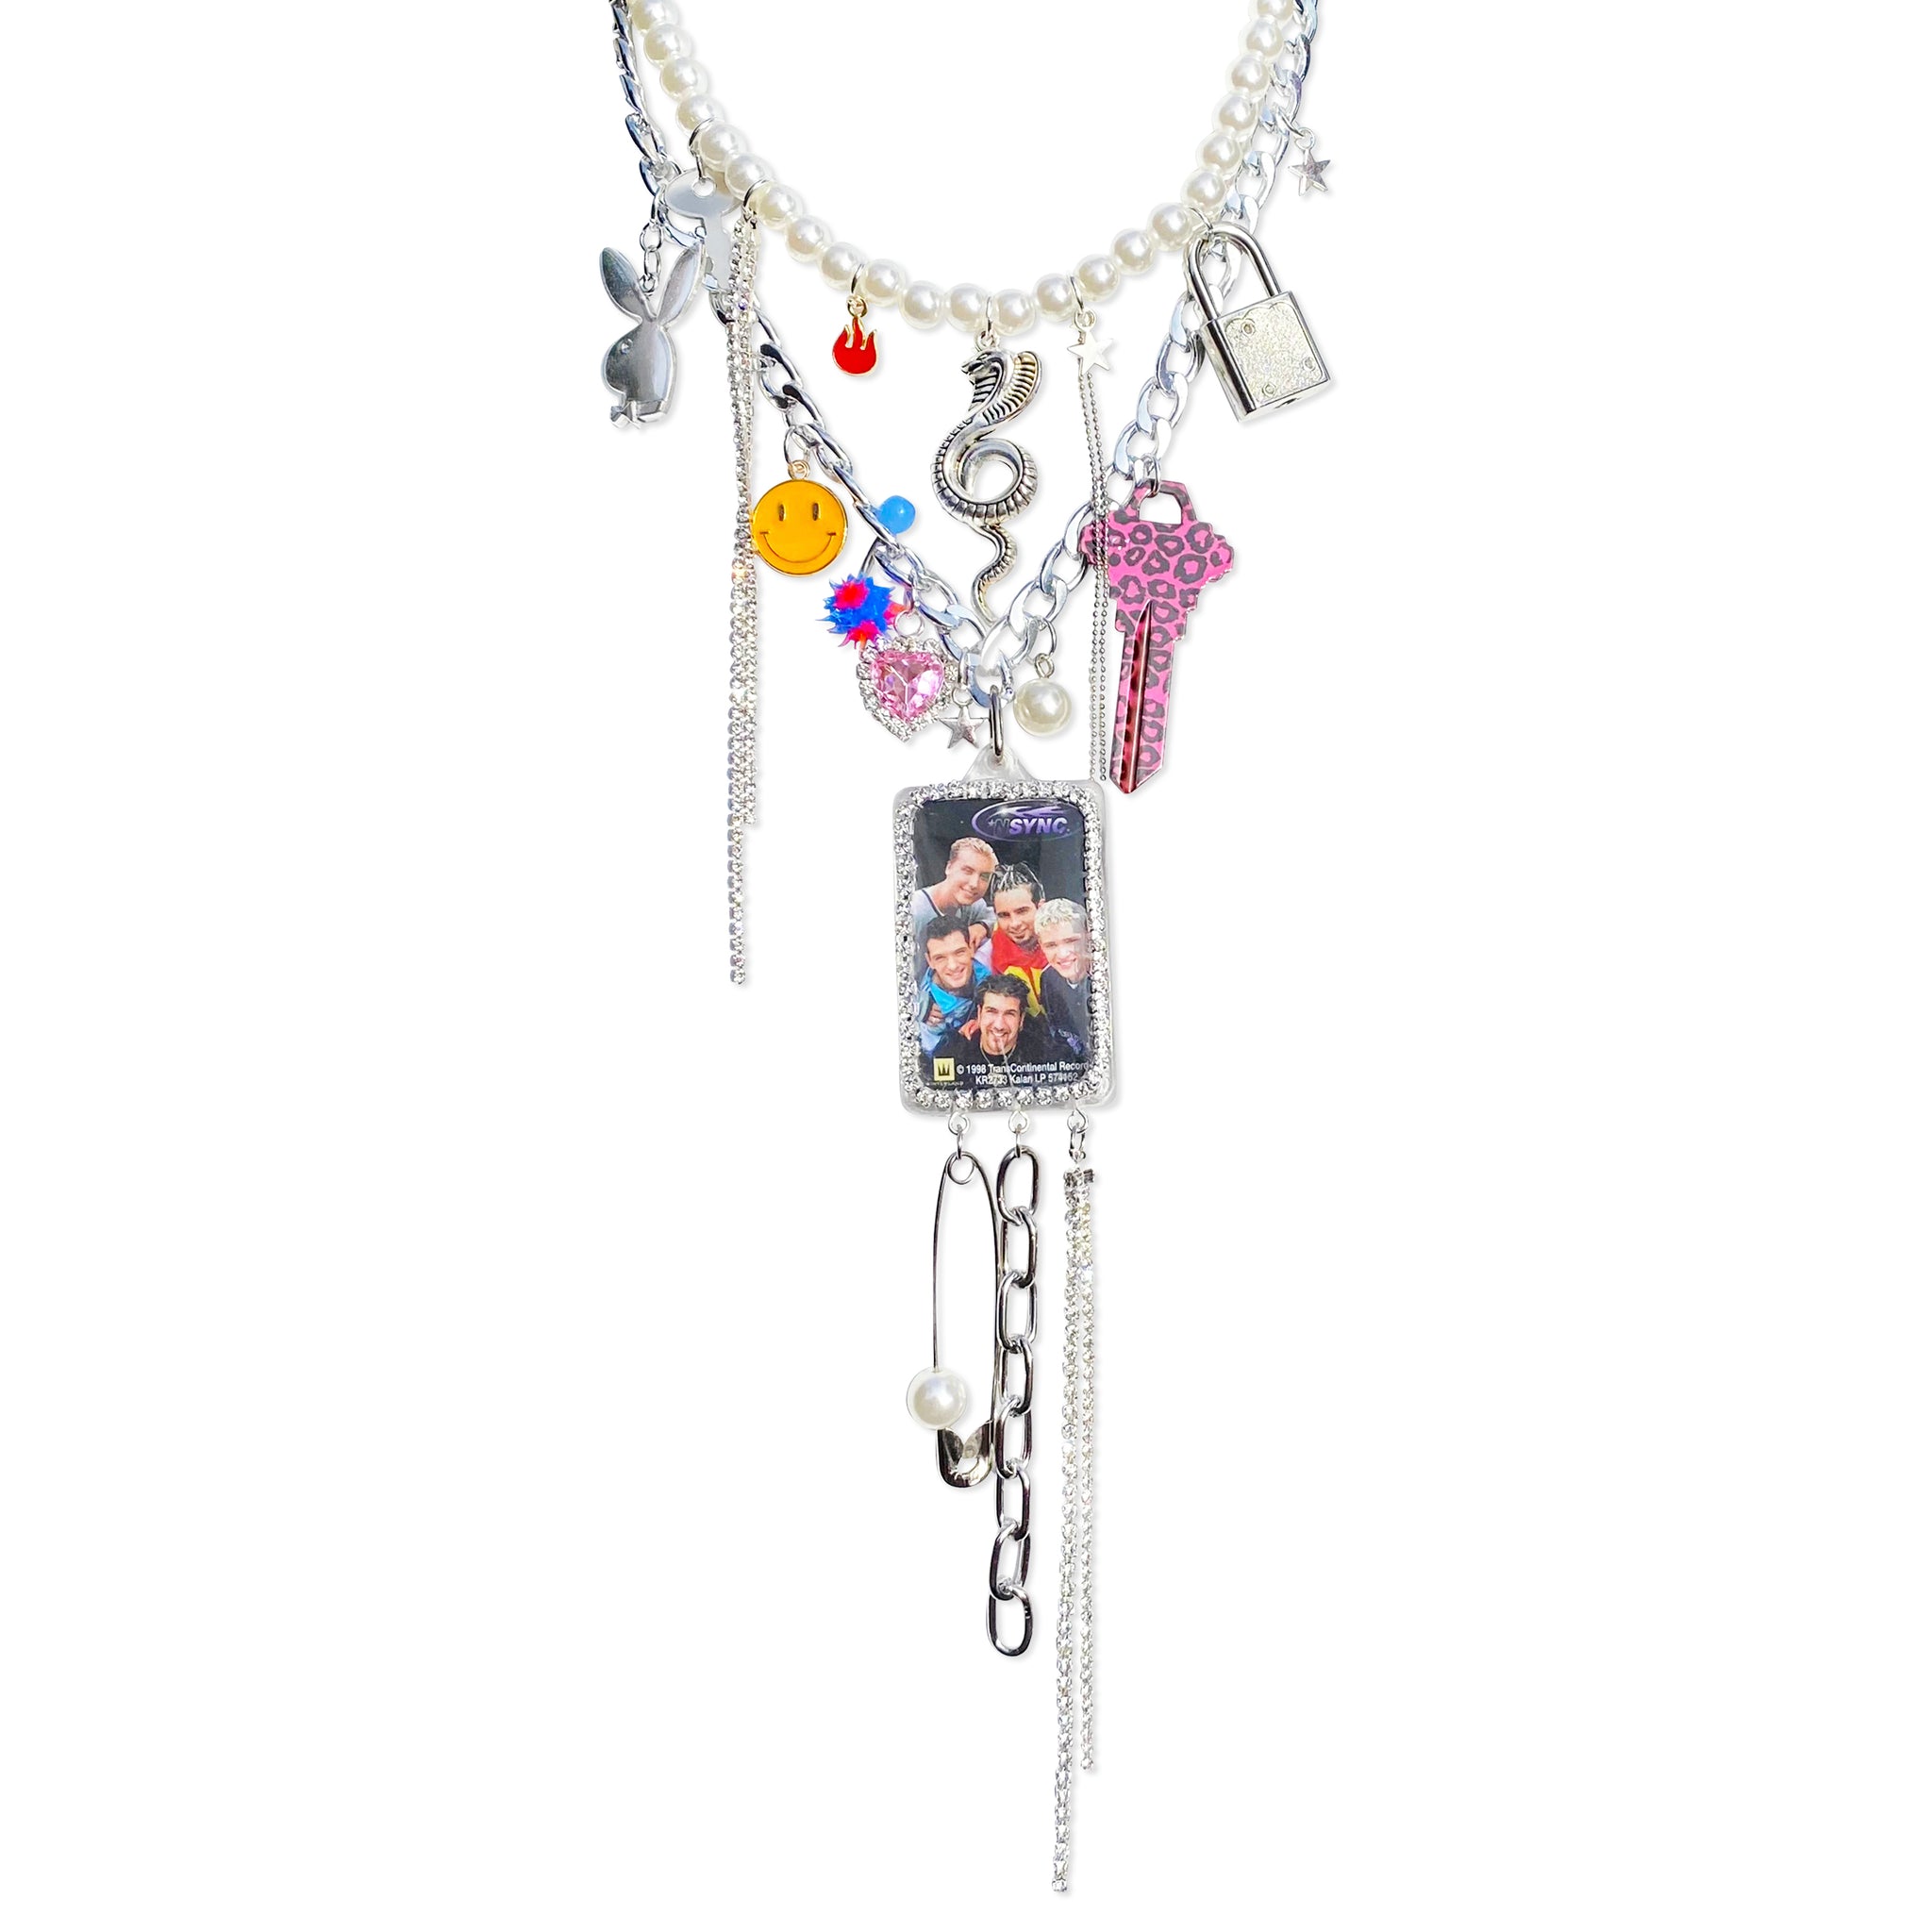 Bedazzled 1998 N'Sync Necklace